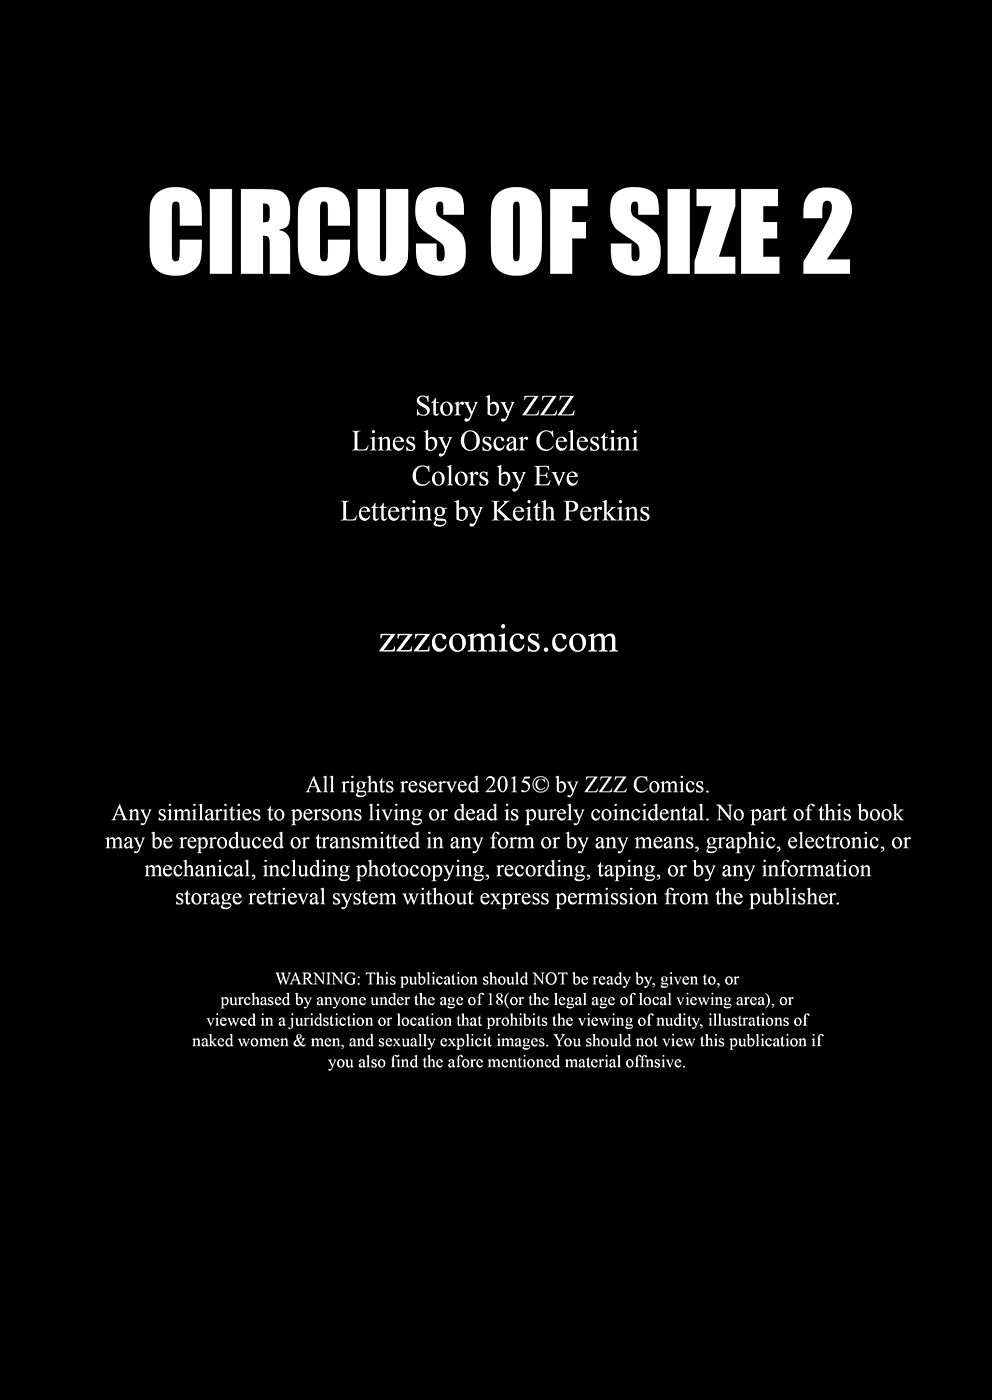 ZZZ-Circus of Size 2 page 1